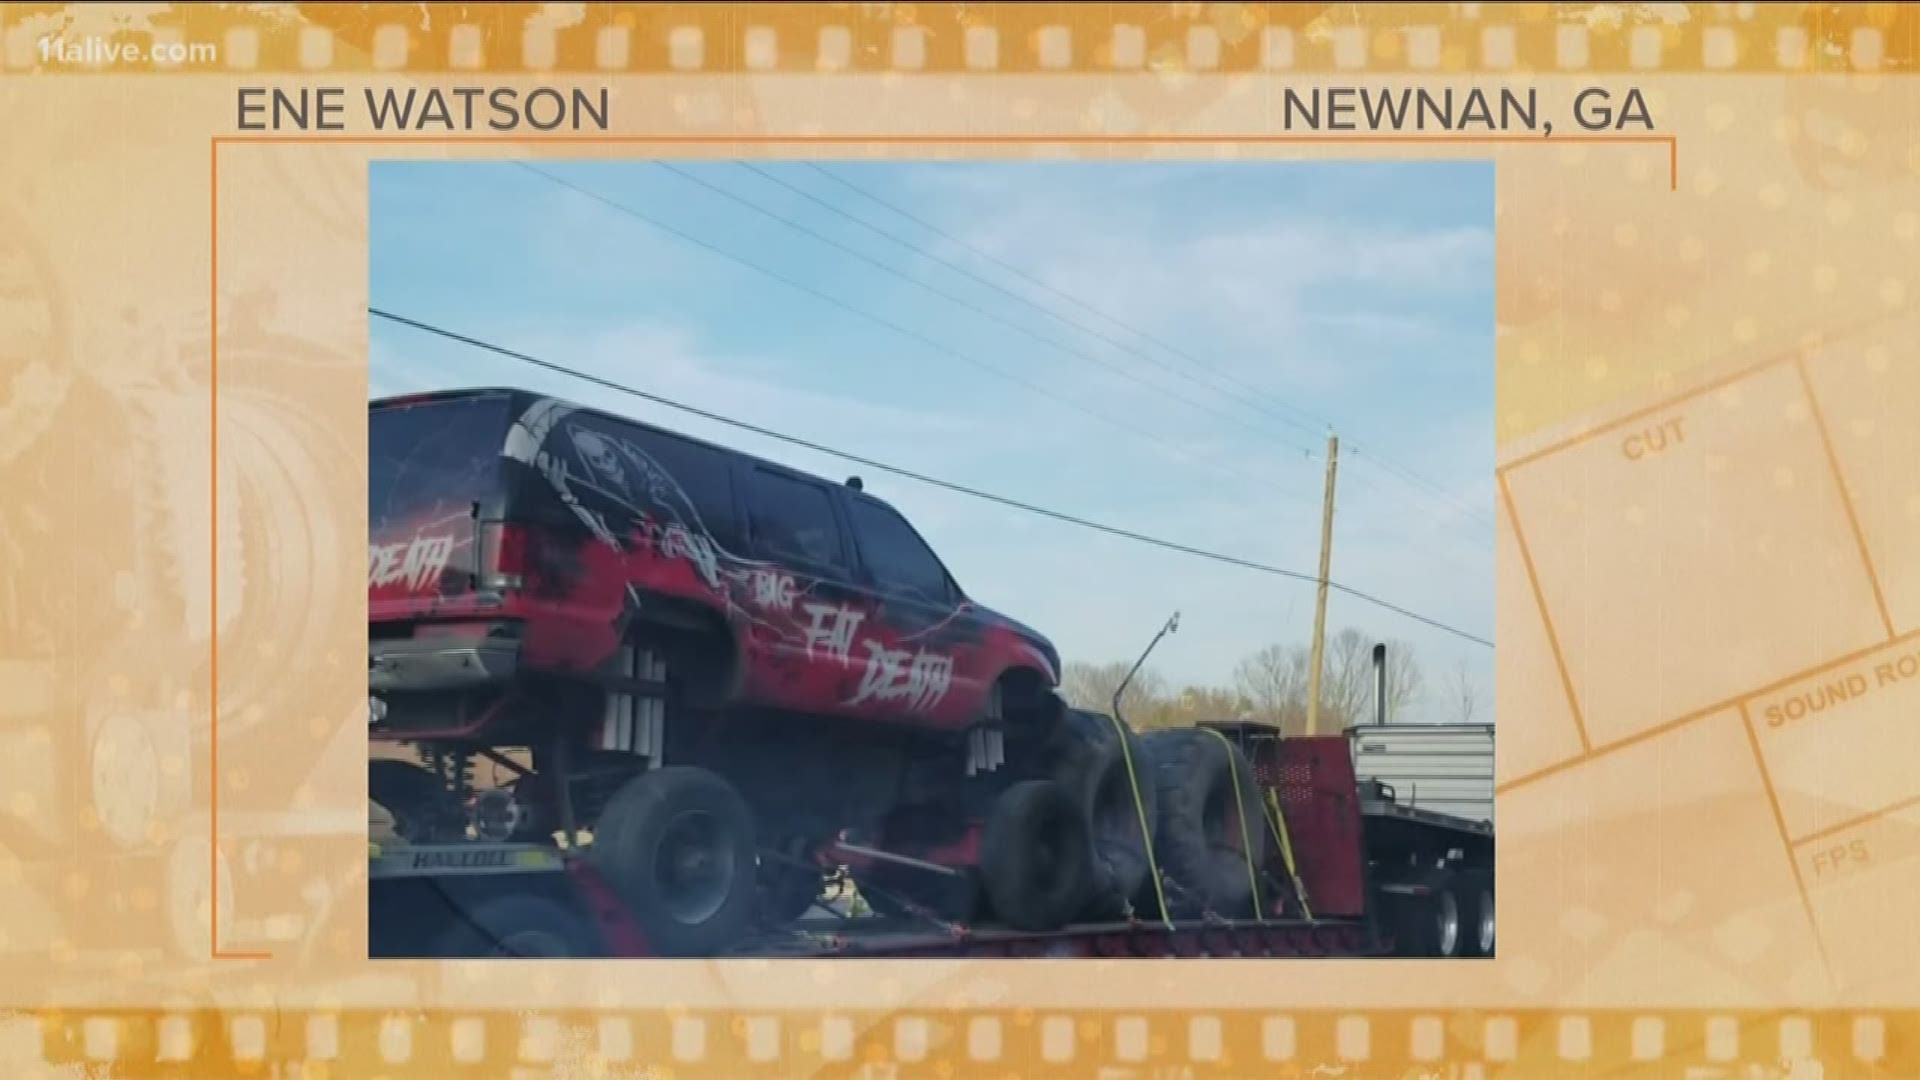 We received a glimpse of the action from our A-Scene Insider Ene Watson  who spotted a Zombieland monster truck in Newnan Georgia over the weekend!